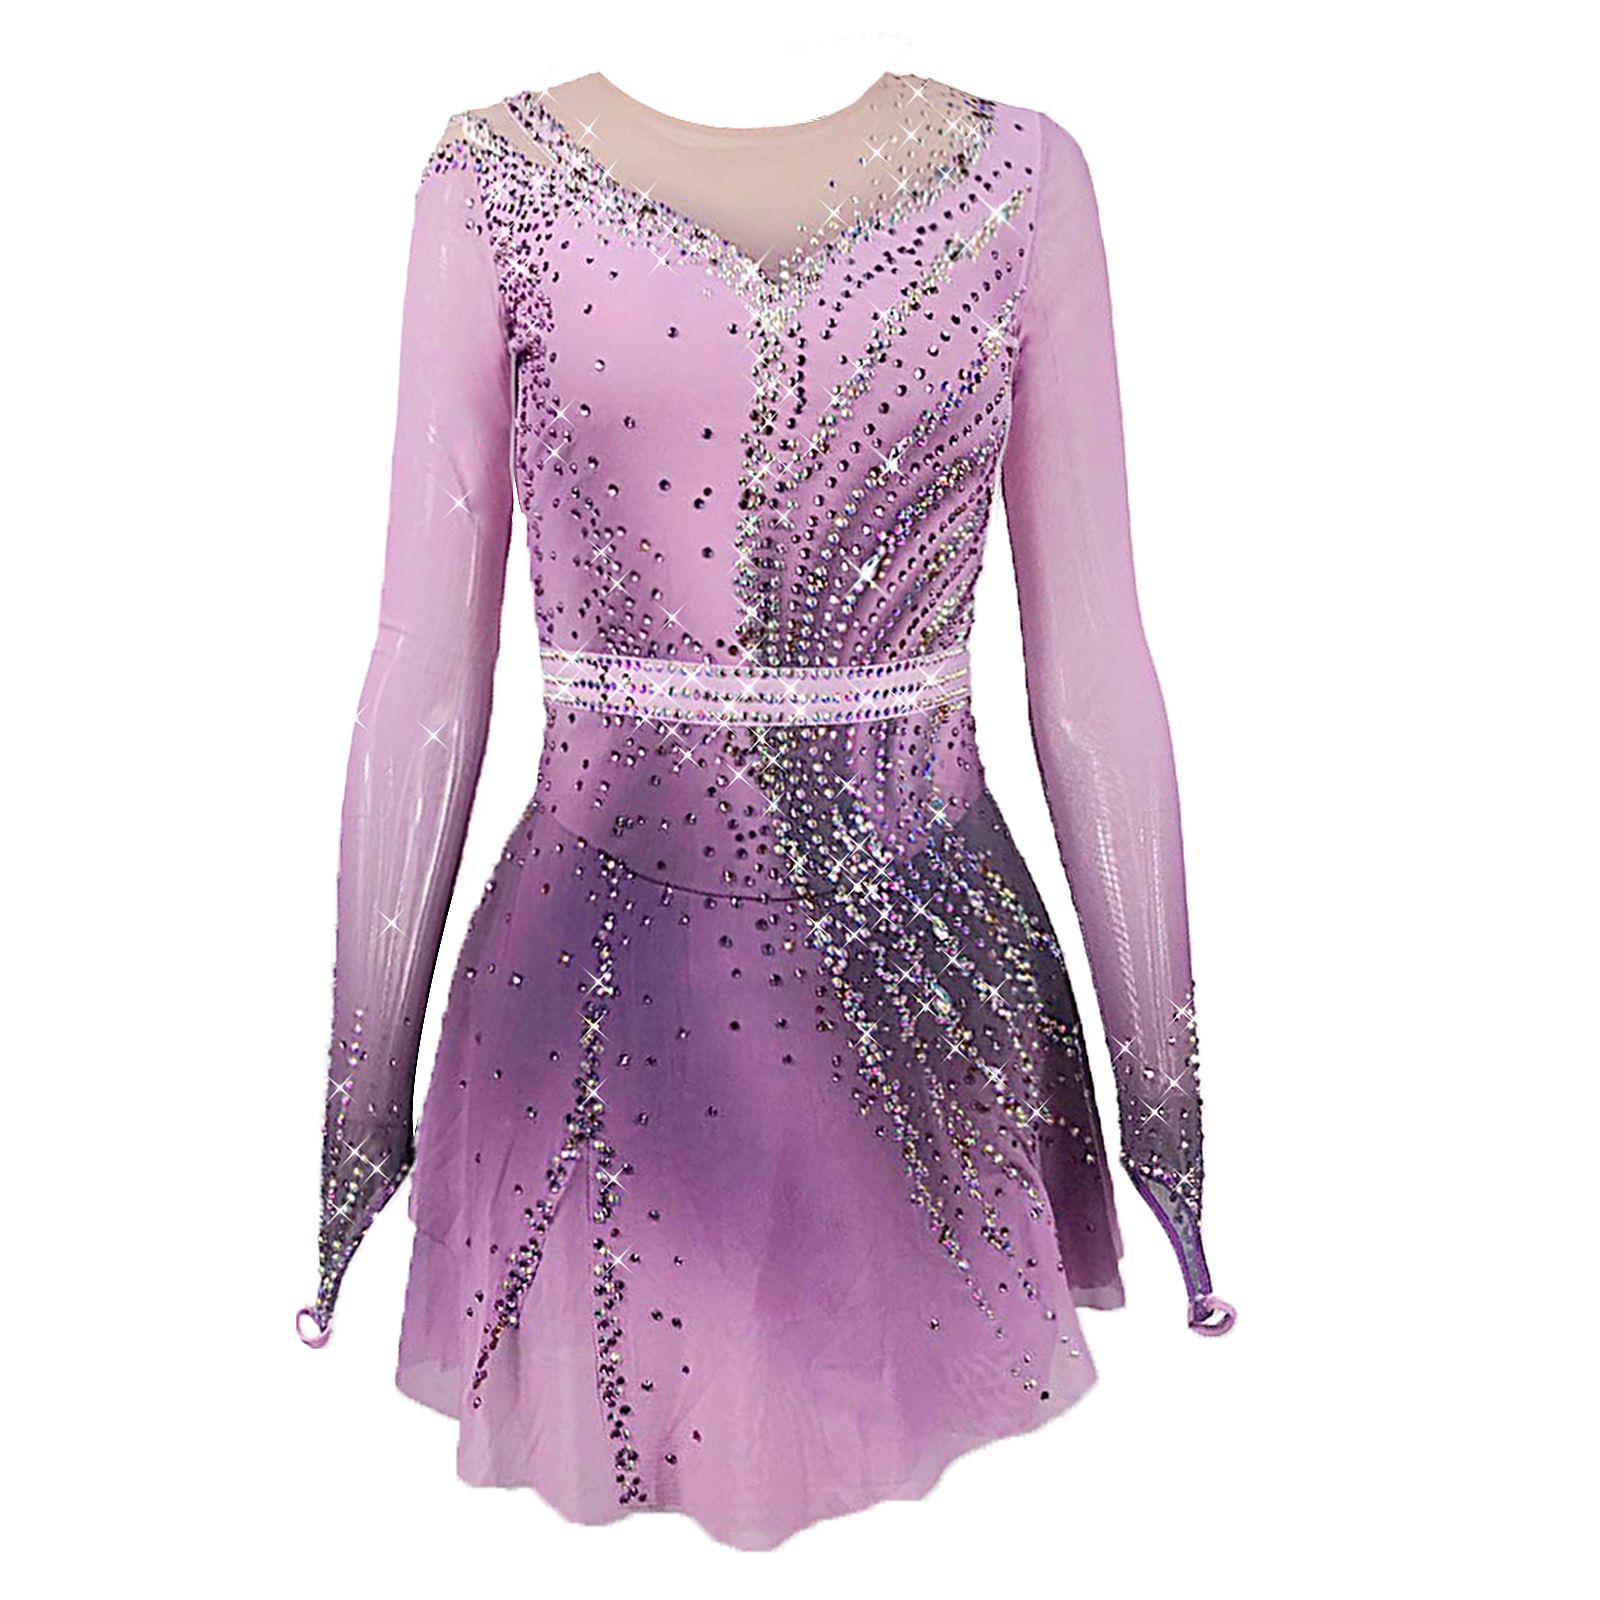 Ice Figure Skating Dress Women's Girls' Yan pink Violet Quality Crystals High Elasticity Training Competition Skating Wear Solid Colored Classic / Rhinestone / Kids Performance Wear